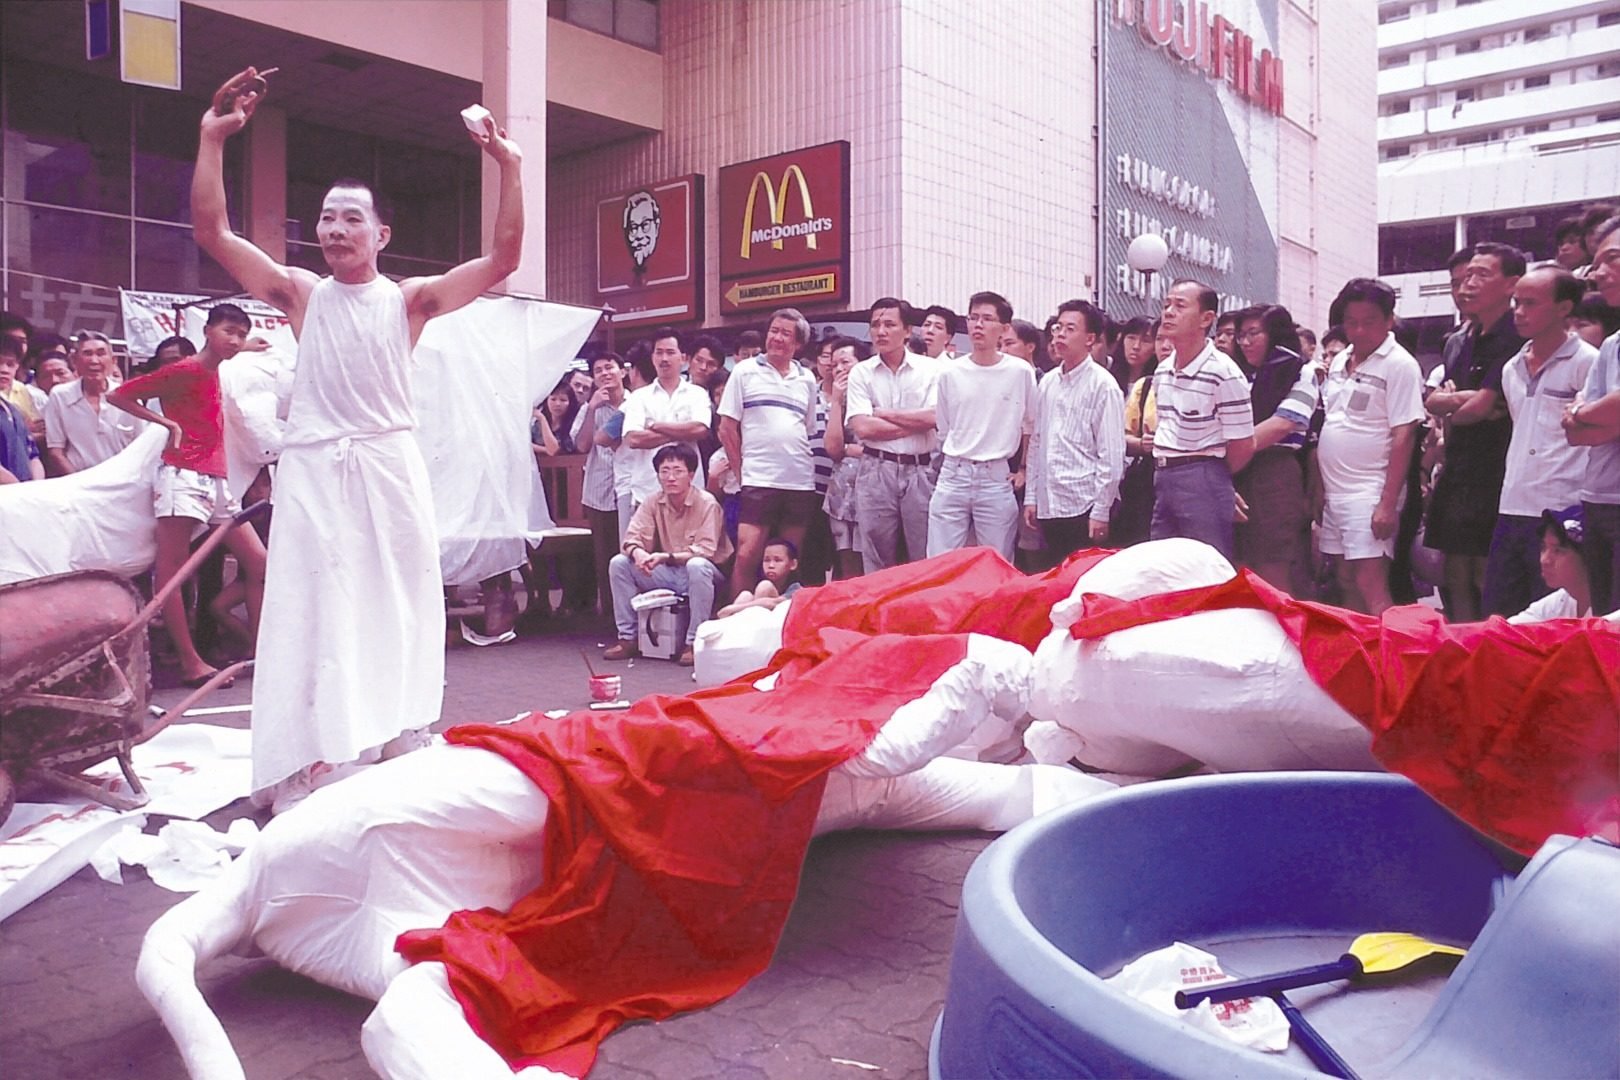 “Tiger’s Whip”, one of Tang Da Wu’s best-known works, is an installation and performance piece first presented in 1991 in Singapore’s Chinatown (Photo: Koh Nguang How)